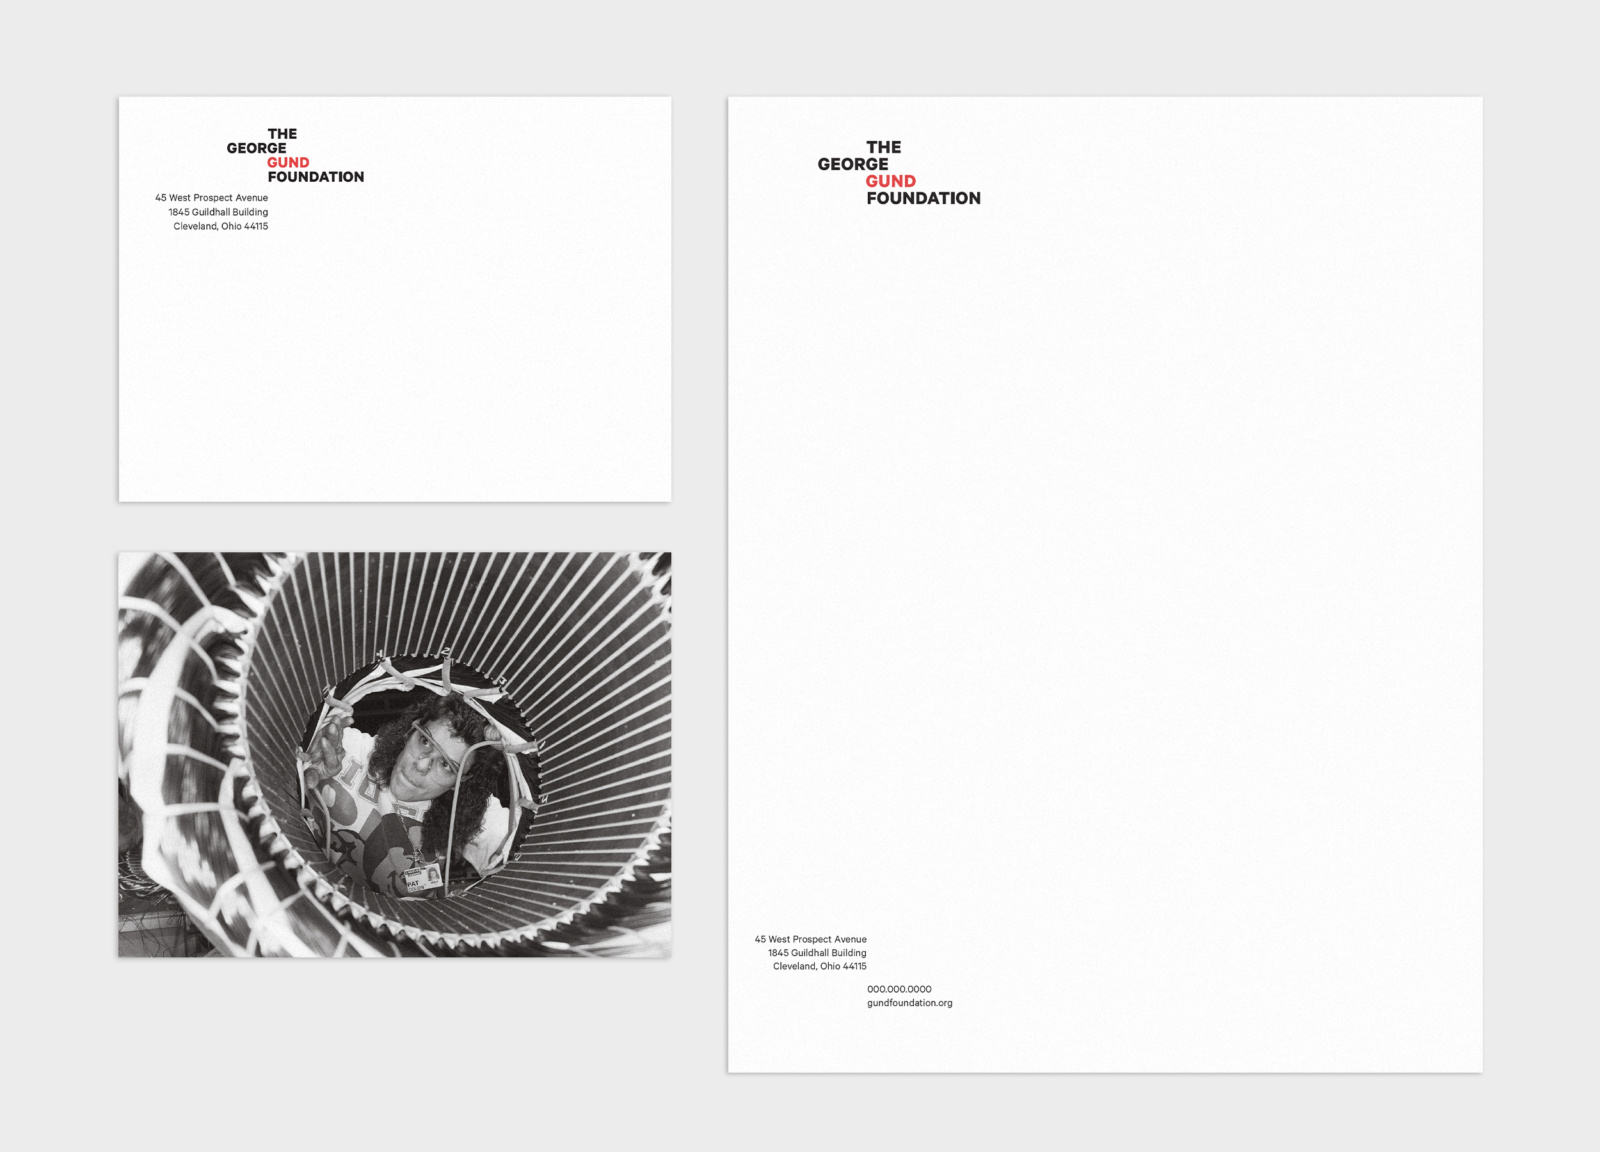 Letterhead and photographic notecard, two print design pieces from The George Gund Foundation identity system